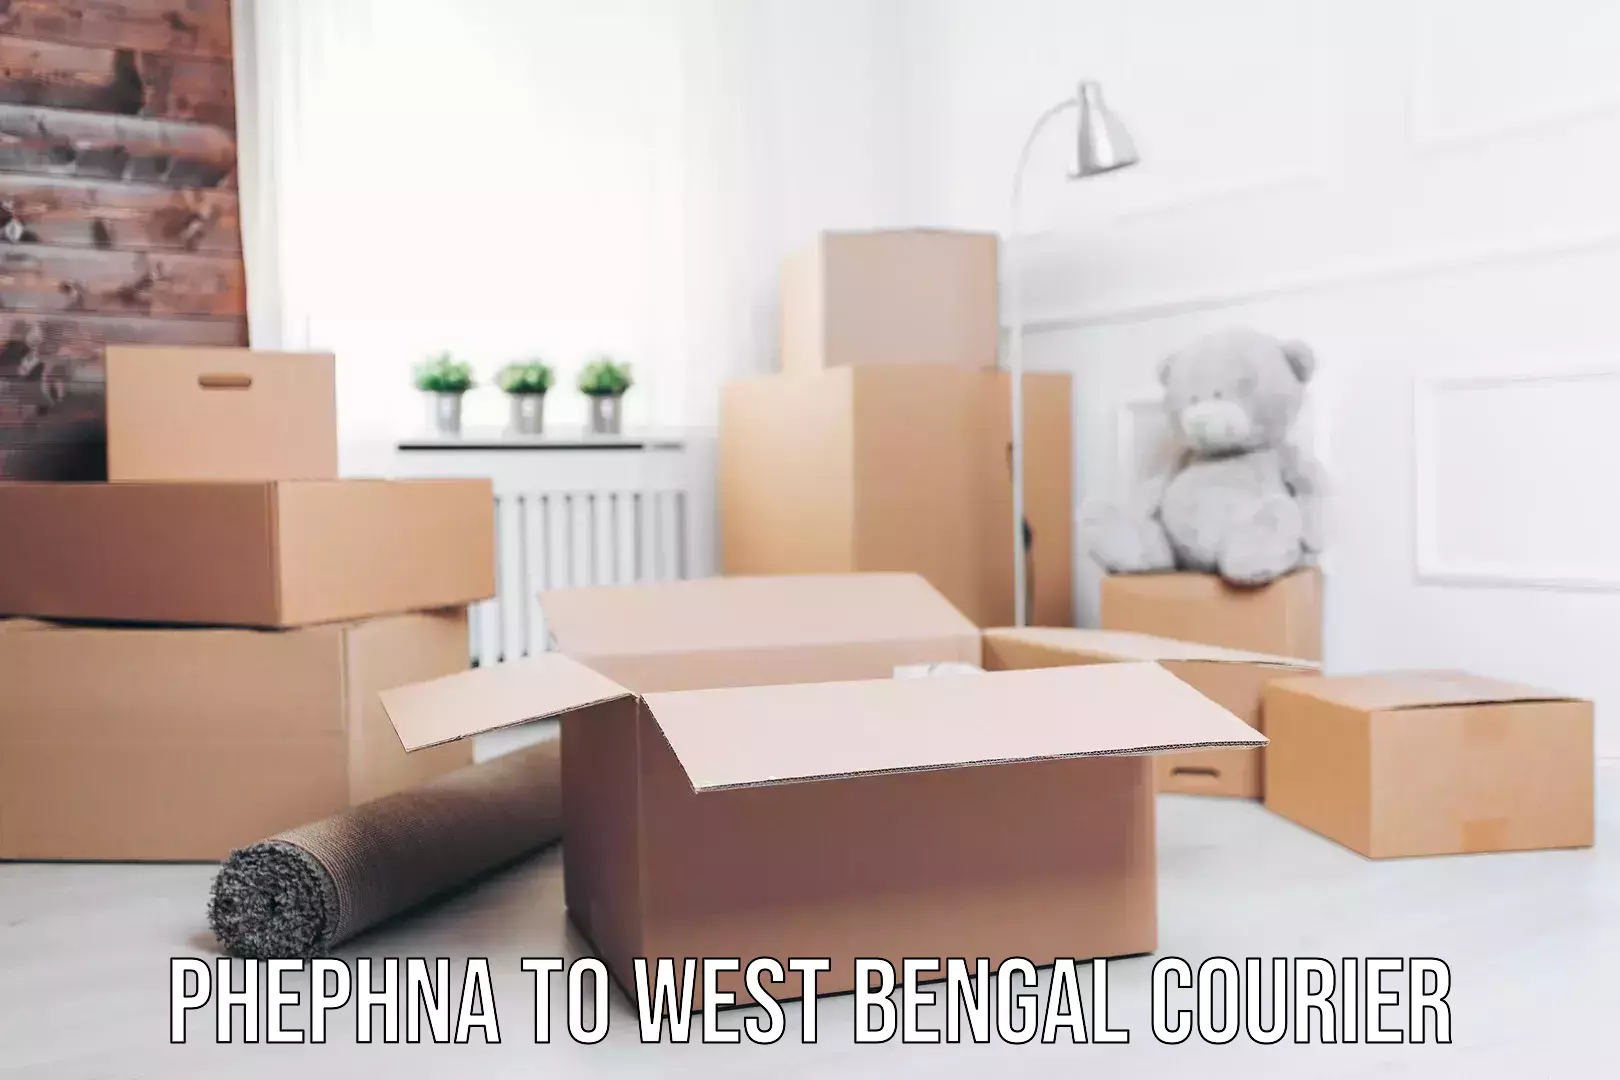 Trusted household movers in Phephna to West Bengal